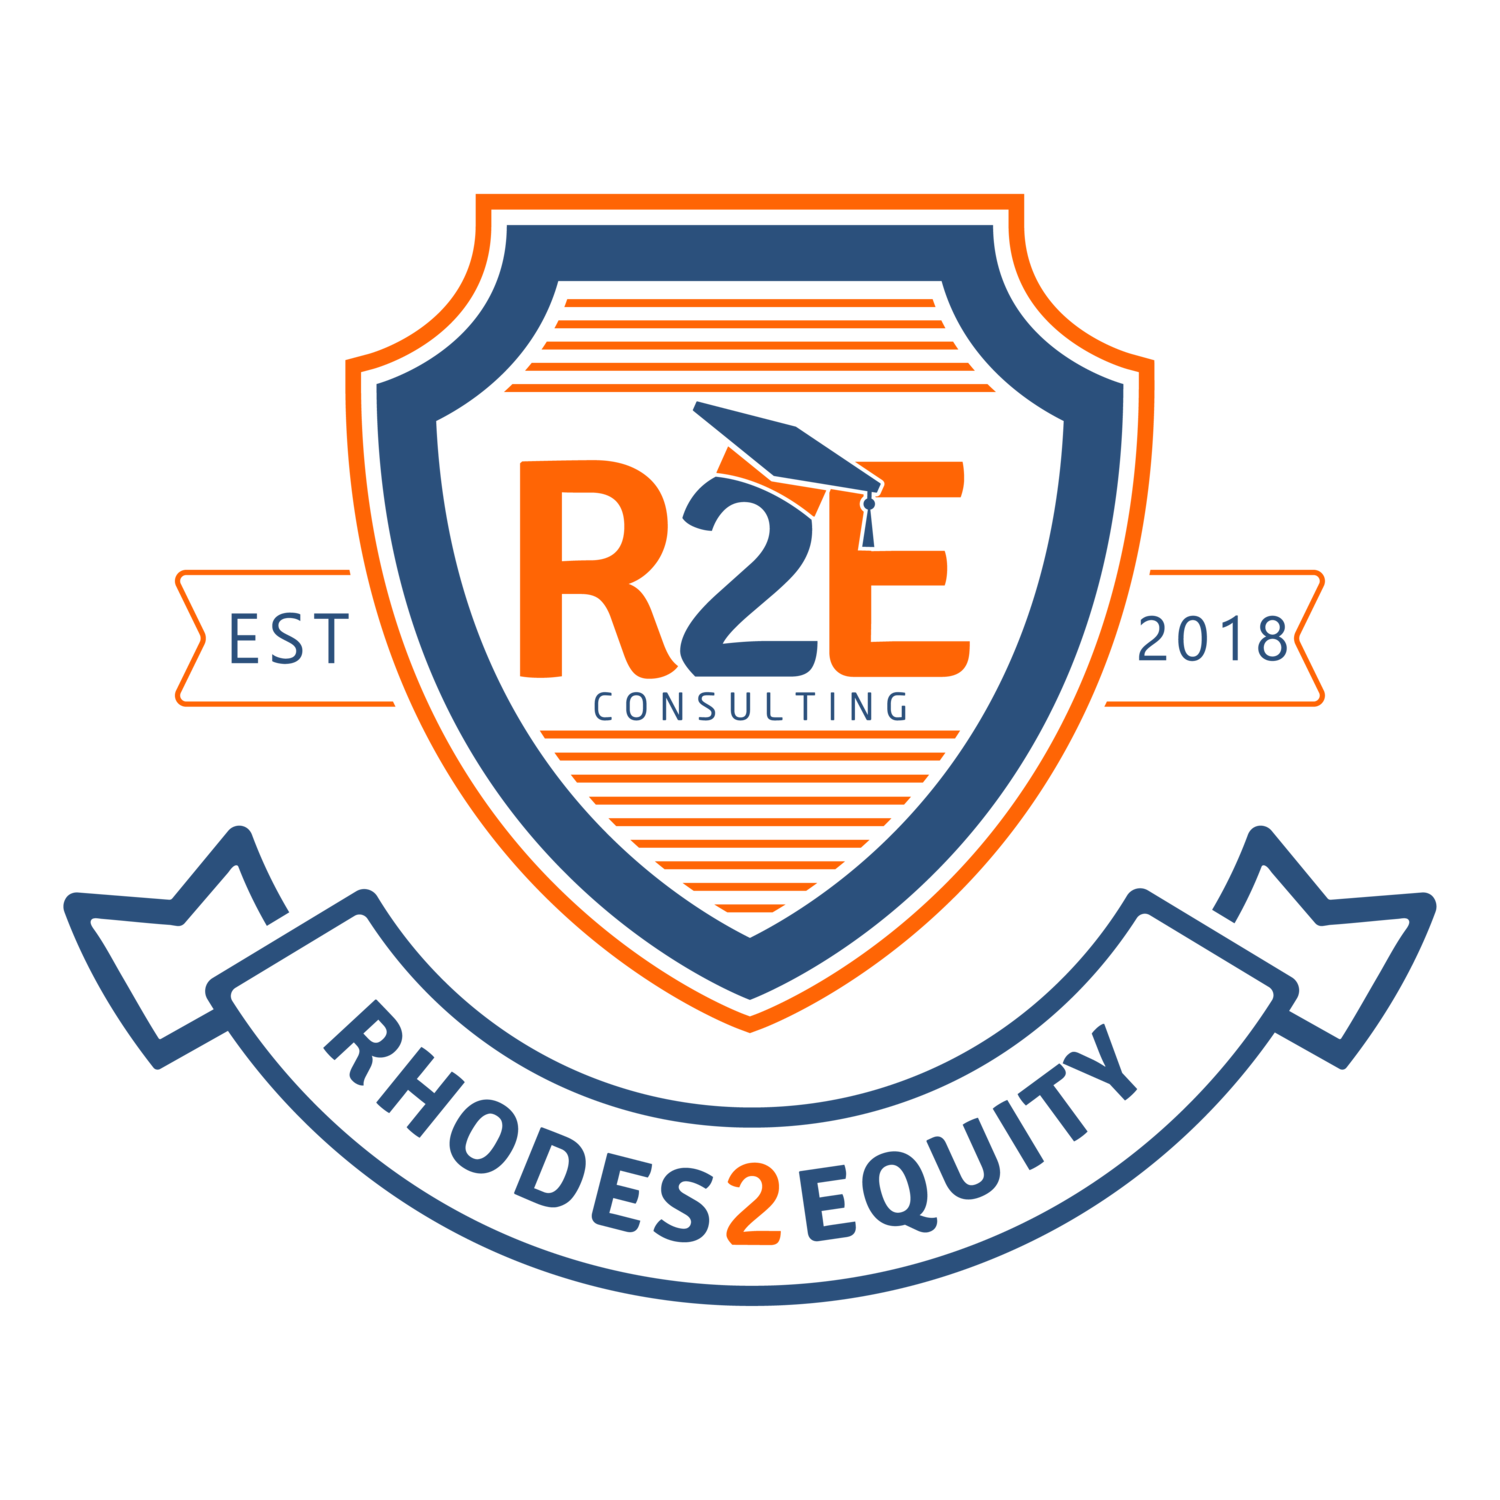 Rhodes2Equity Consulting 